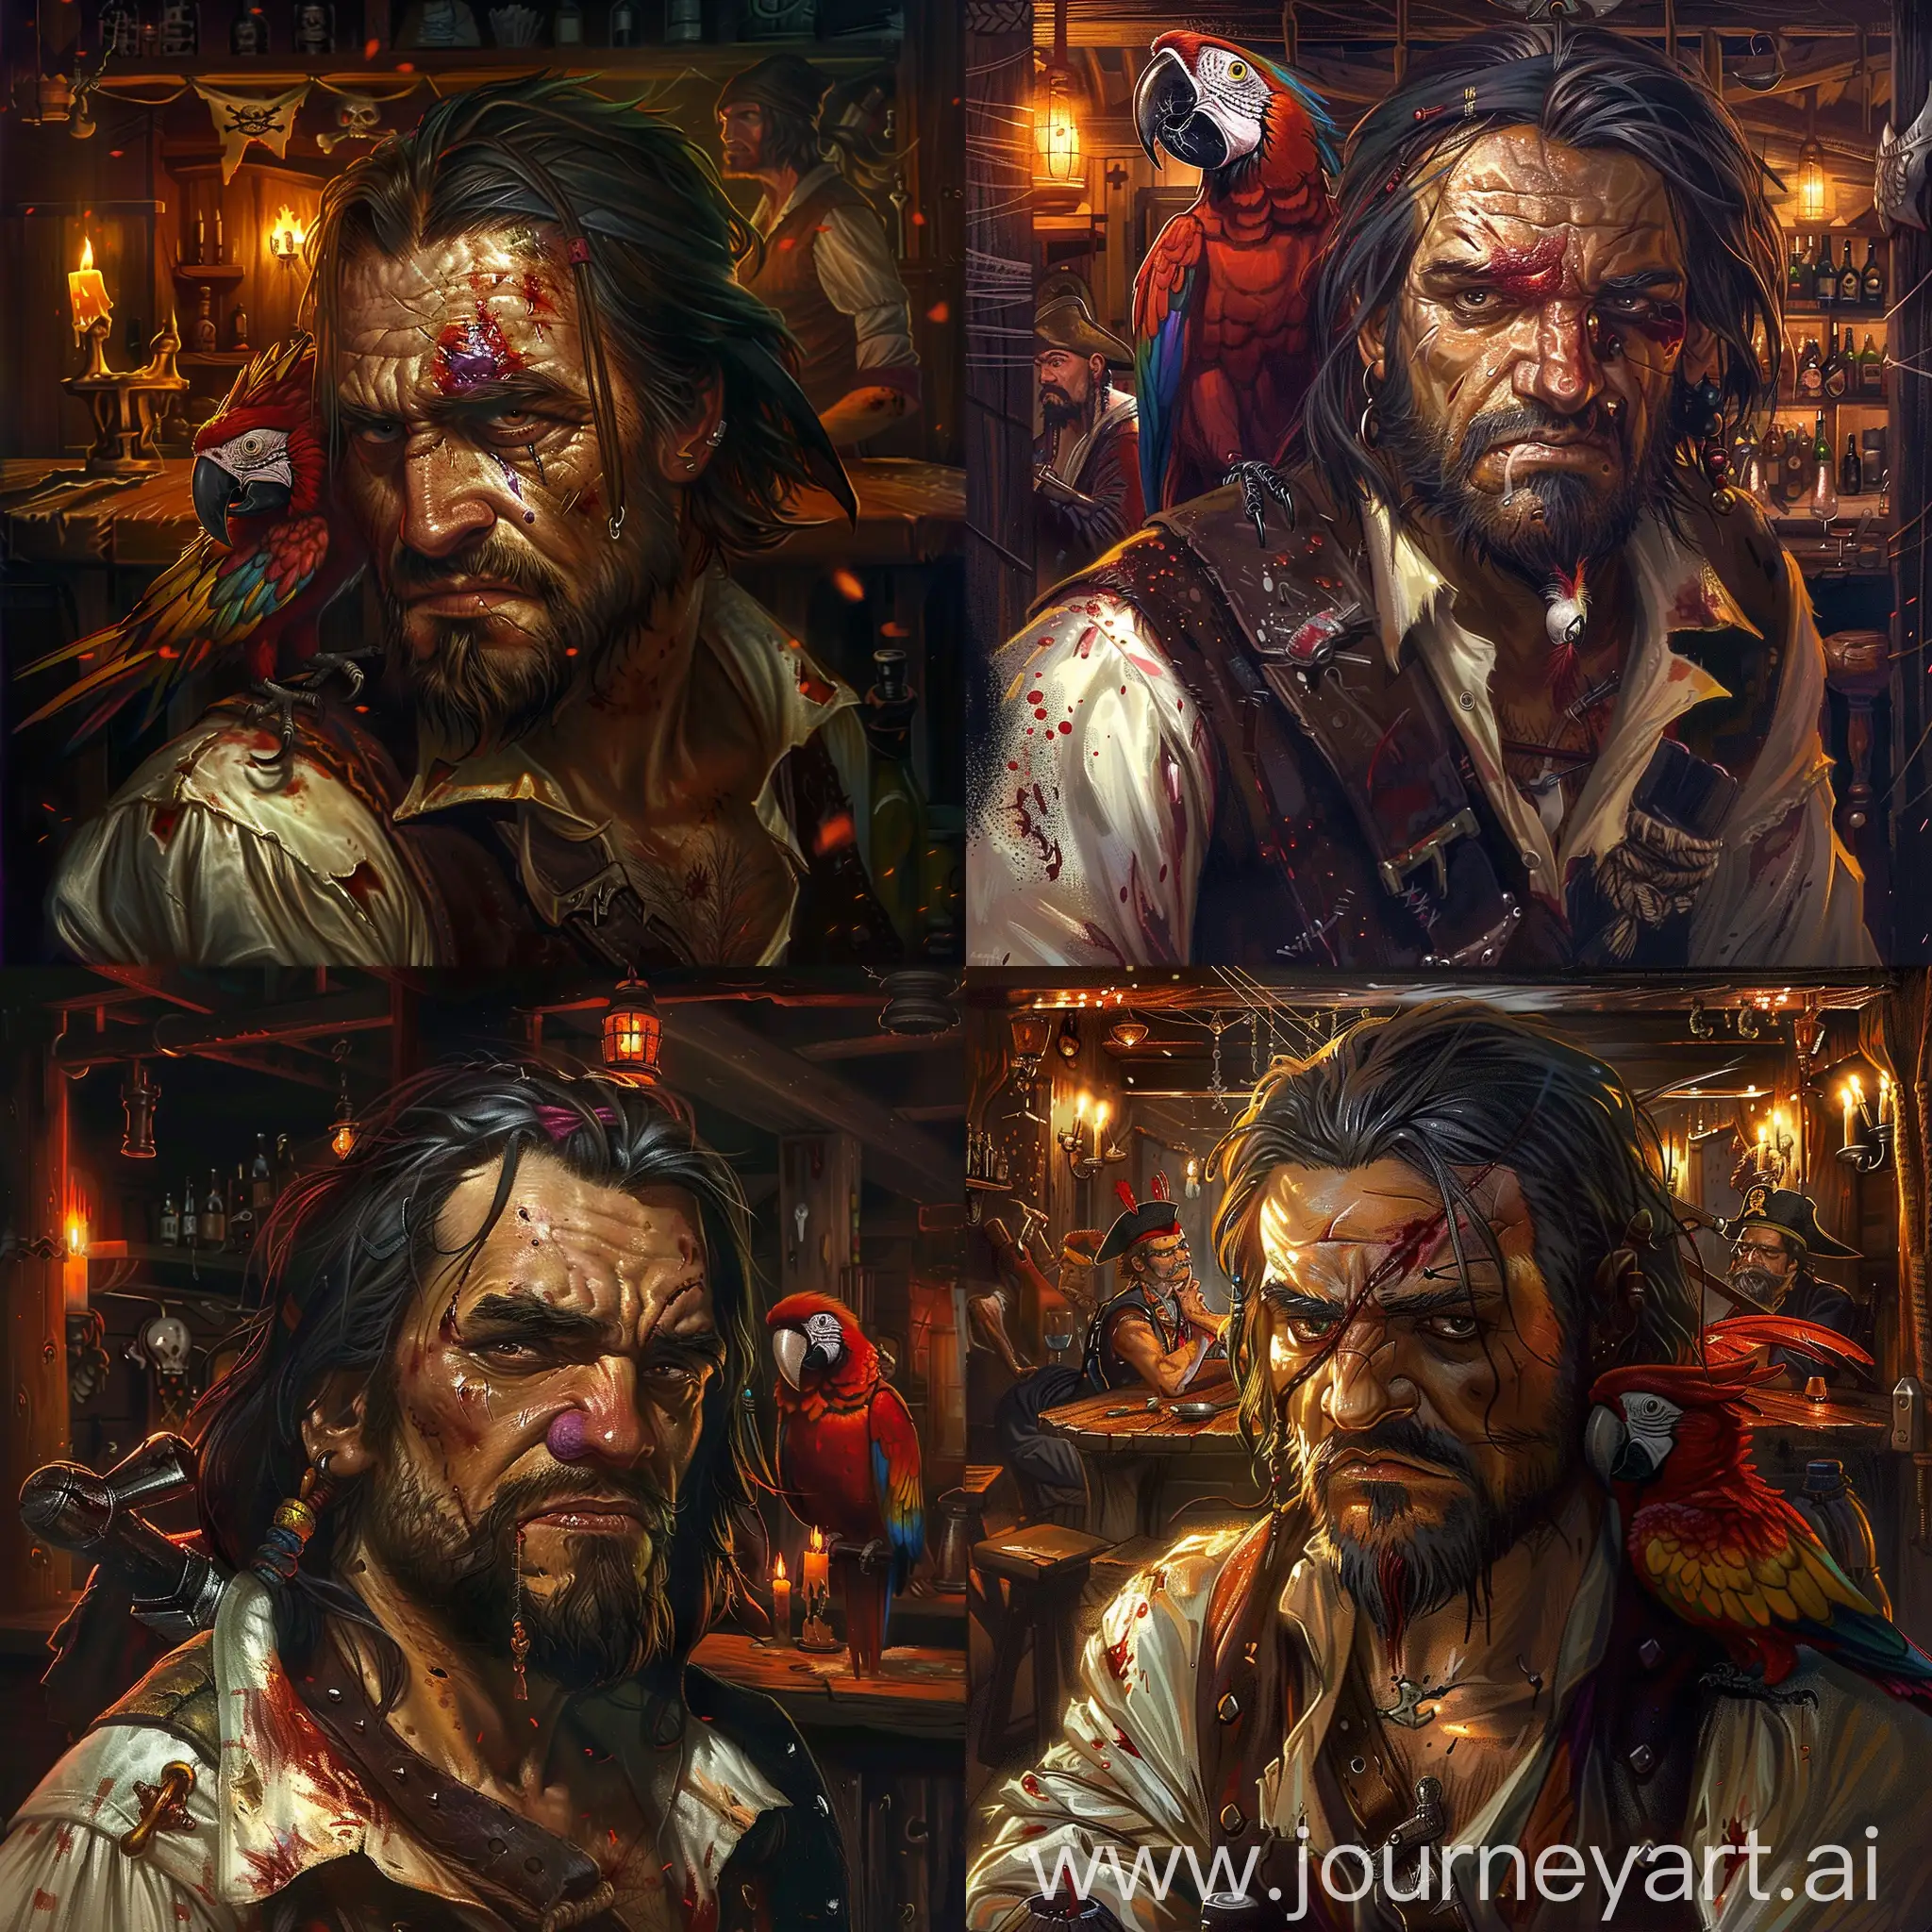 Intriguing-Dark-Fantasy-Pirate-with-Bruised-Forehead-and-Parrot-in-Tavern